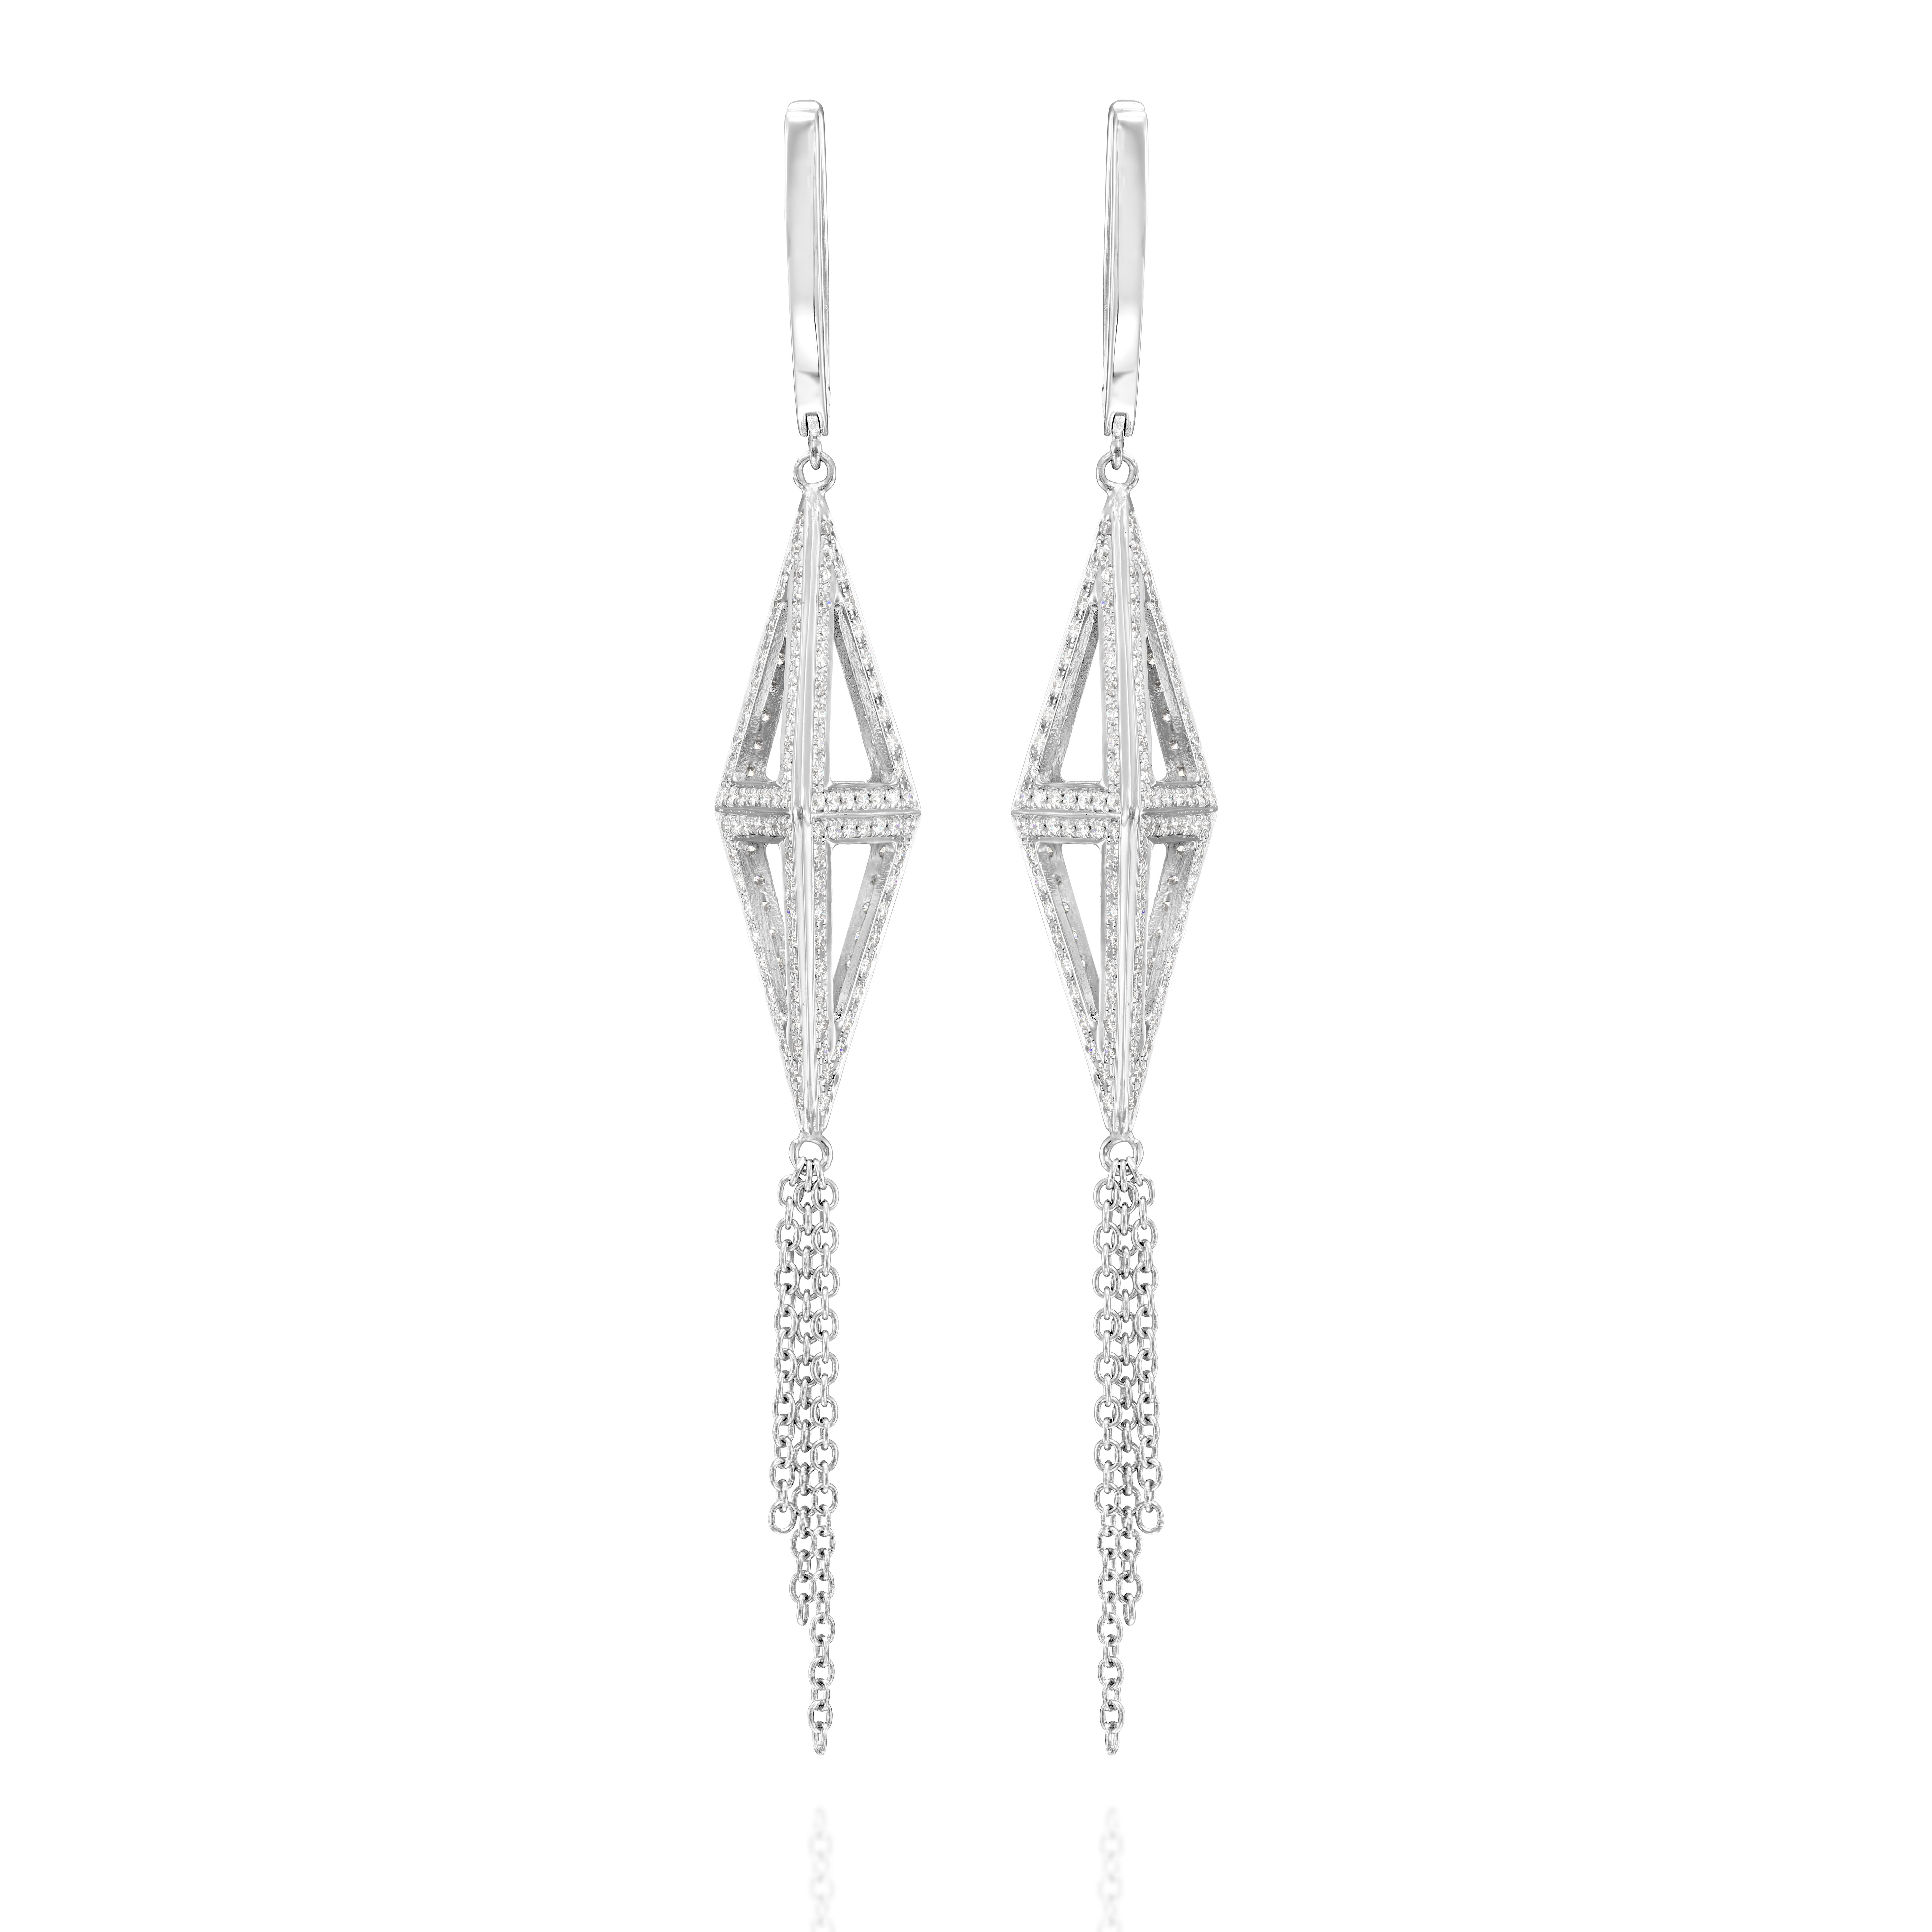 Bochic Pyramid gold and diamond earrings 
184 White Diamonds F Color and VS Clarity 1.04 Carat 
116 White Diamonds F color and VS Clarity 0.46 Carat 
18 K White gold 
11 grams 
Signed 
Comes with a lather black case 